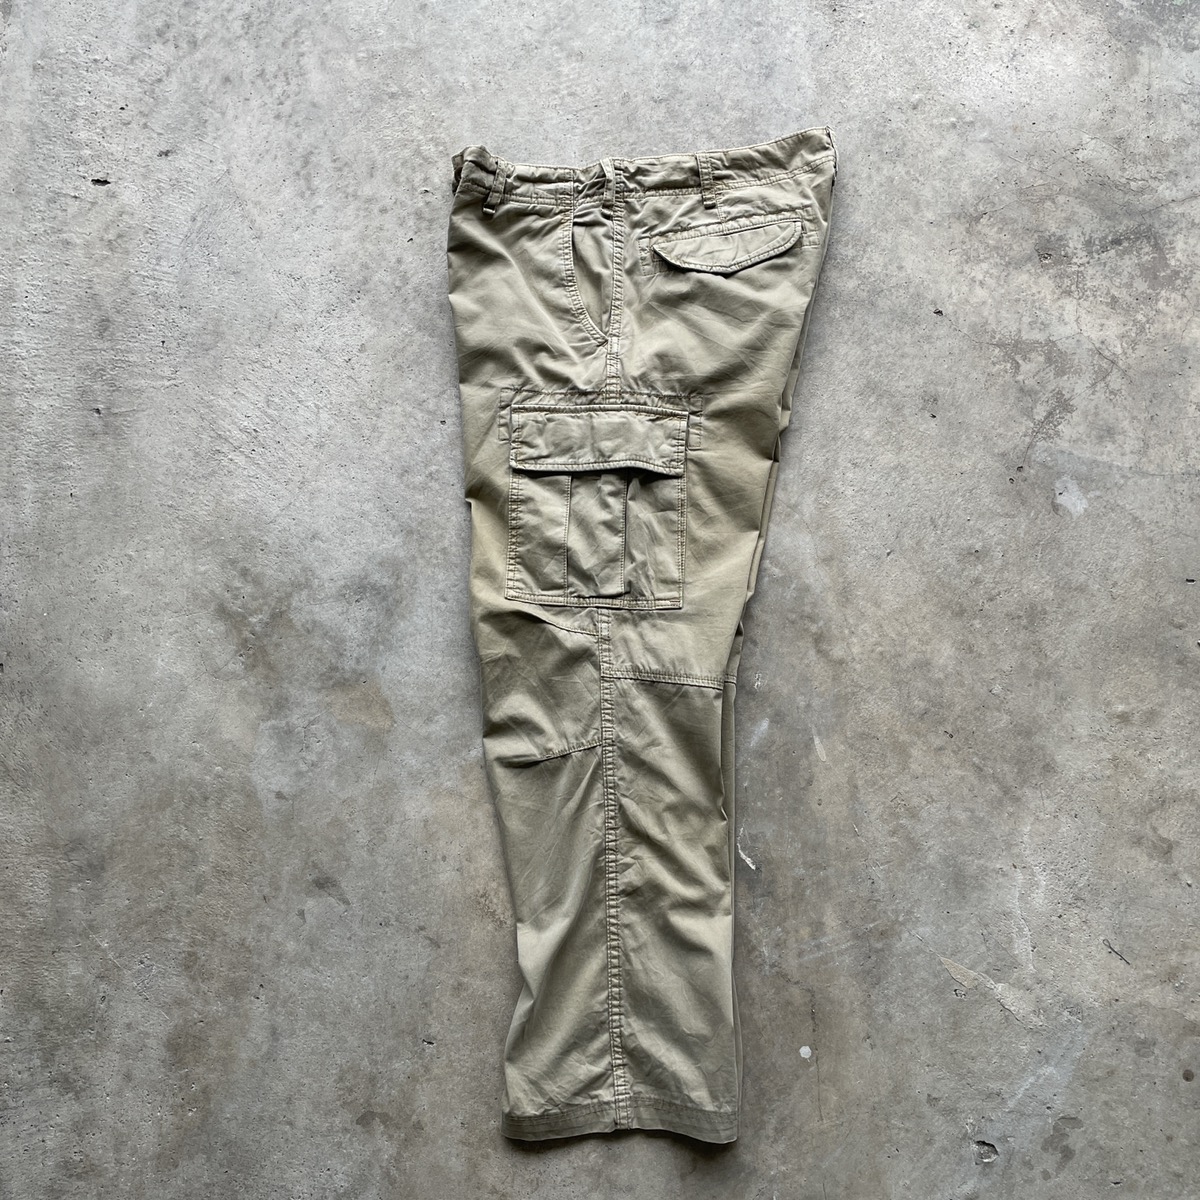 Vintage - Japanese Brand Faded Multipocket Tactical Cargo Pants W33x28 - 10